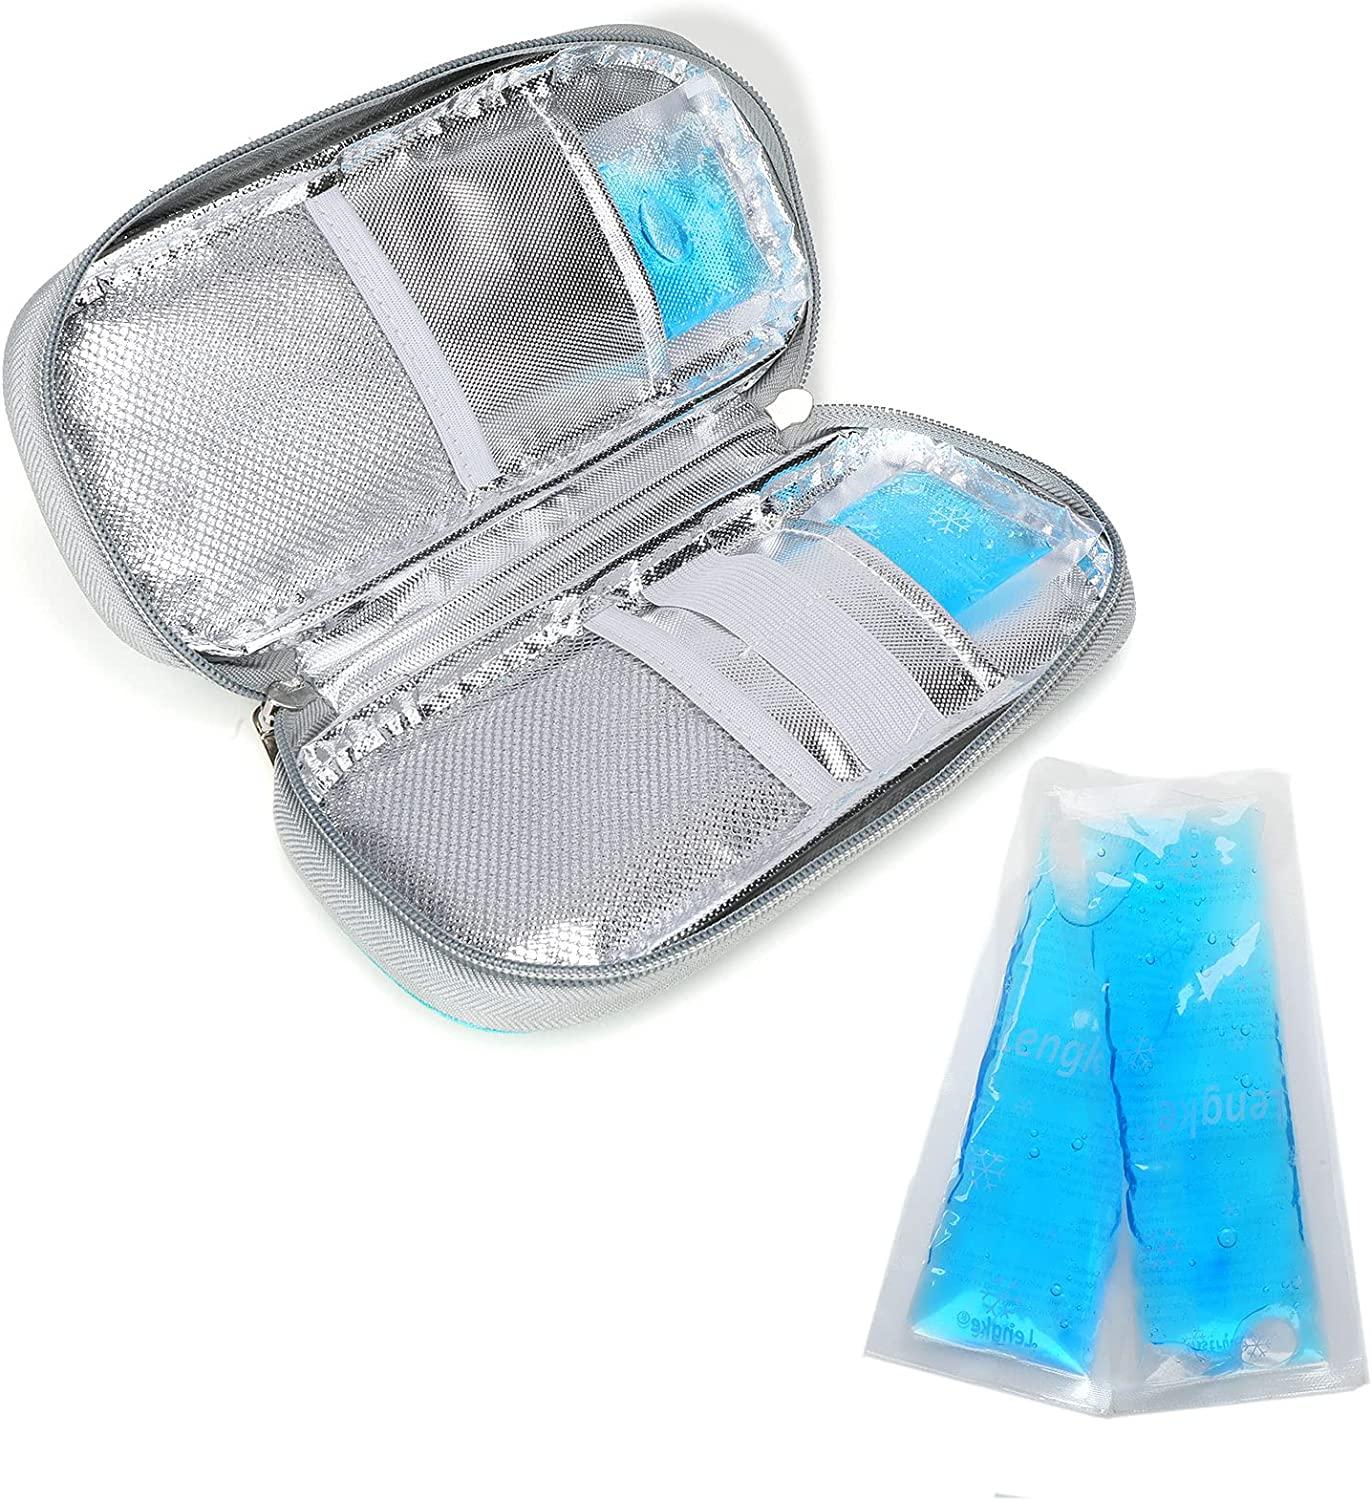 Are Instant Cold Or Gel Packs As Good As Ice?